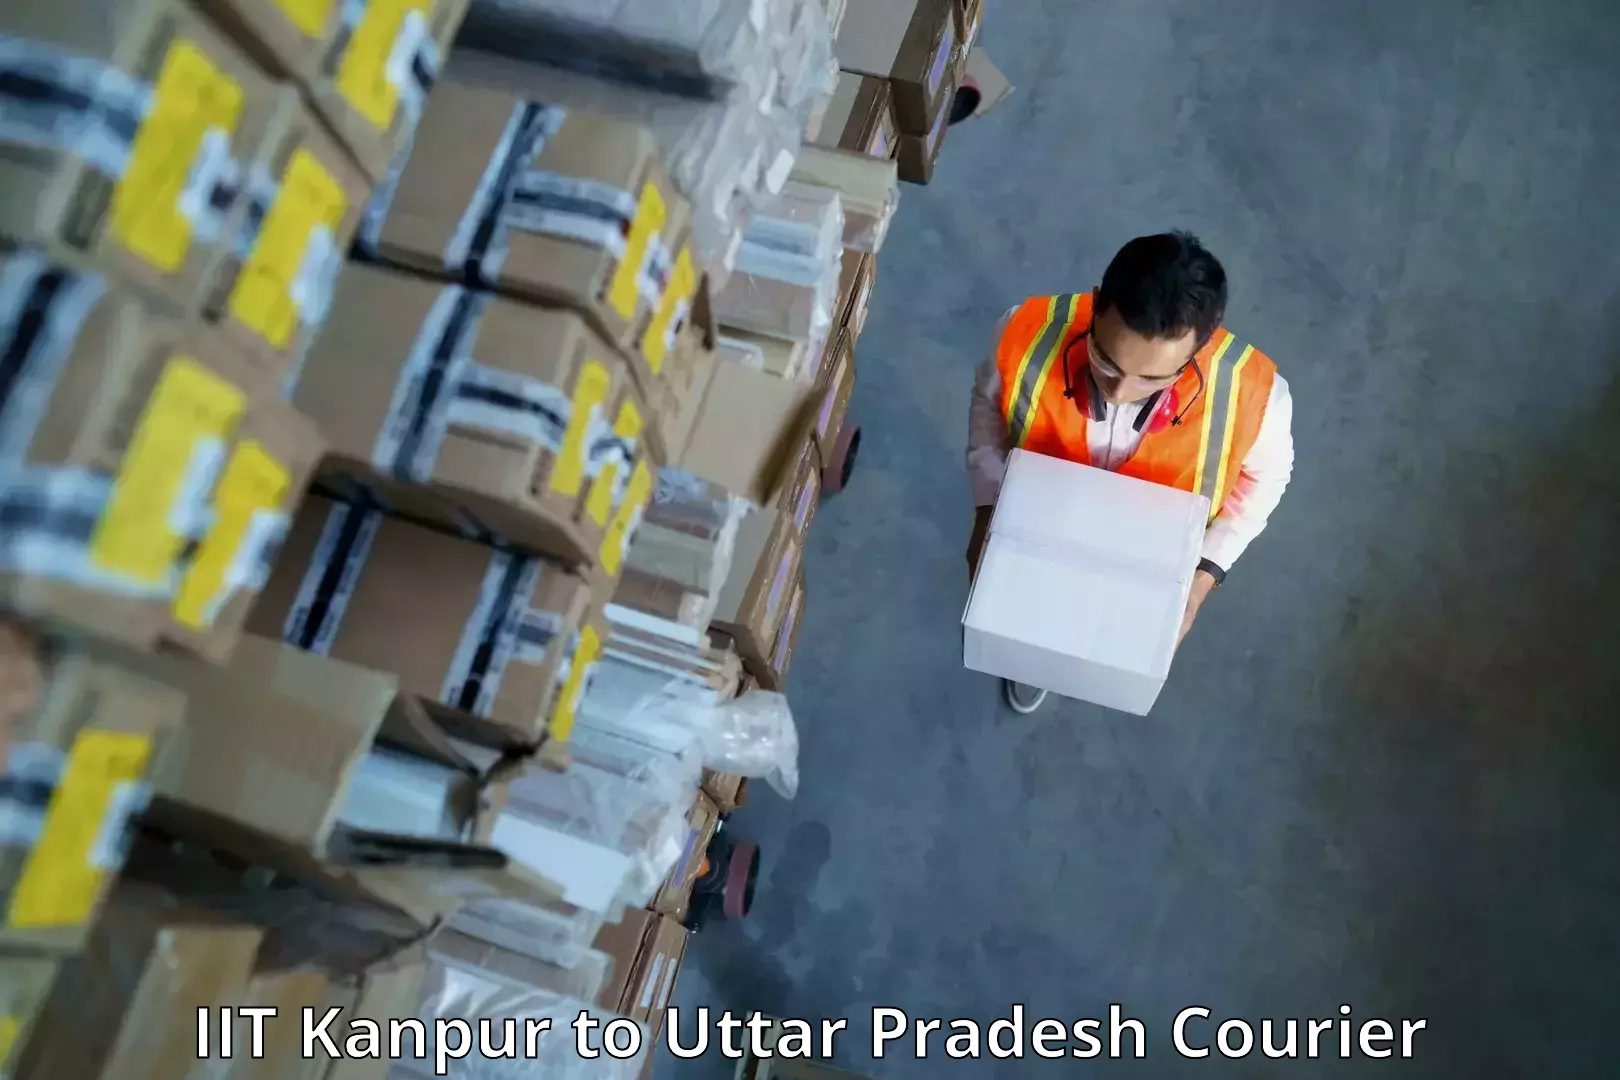 User-friendly delivery service IIT Kanpur to Deoband